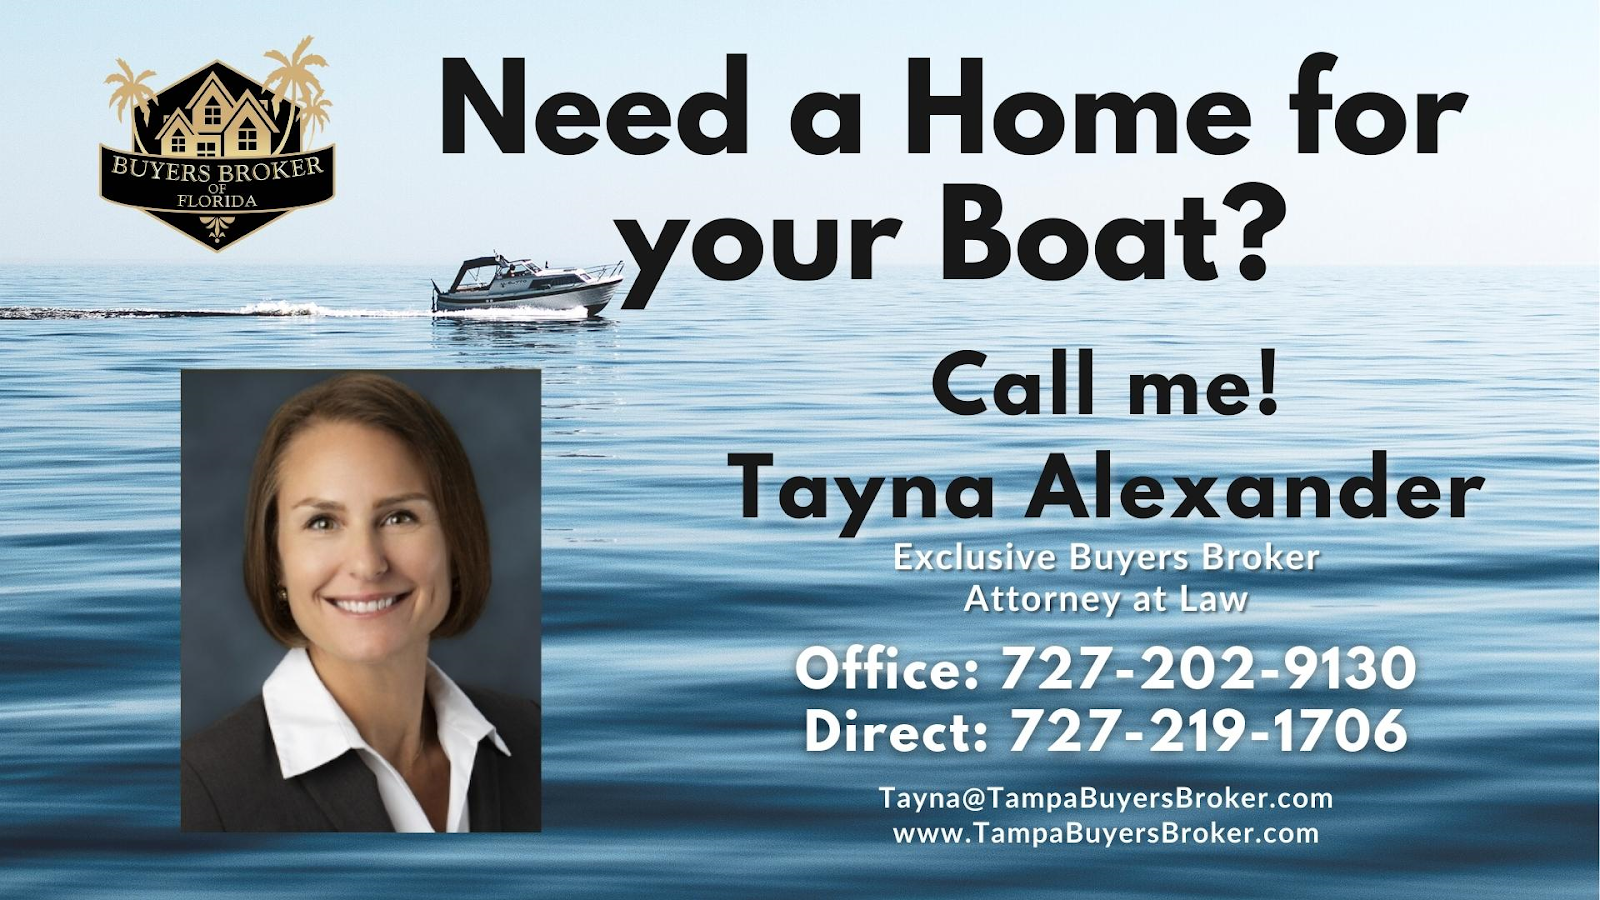 Contact Buyers Agent & Attorney Tayna Alexander